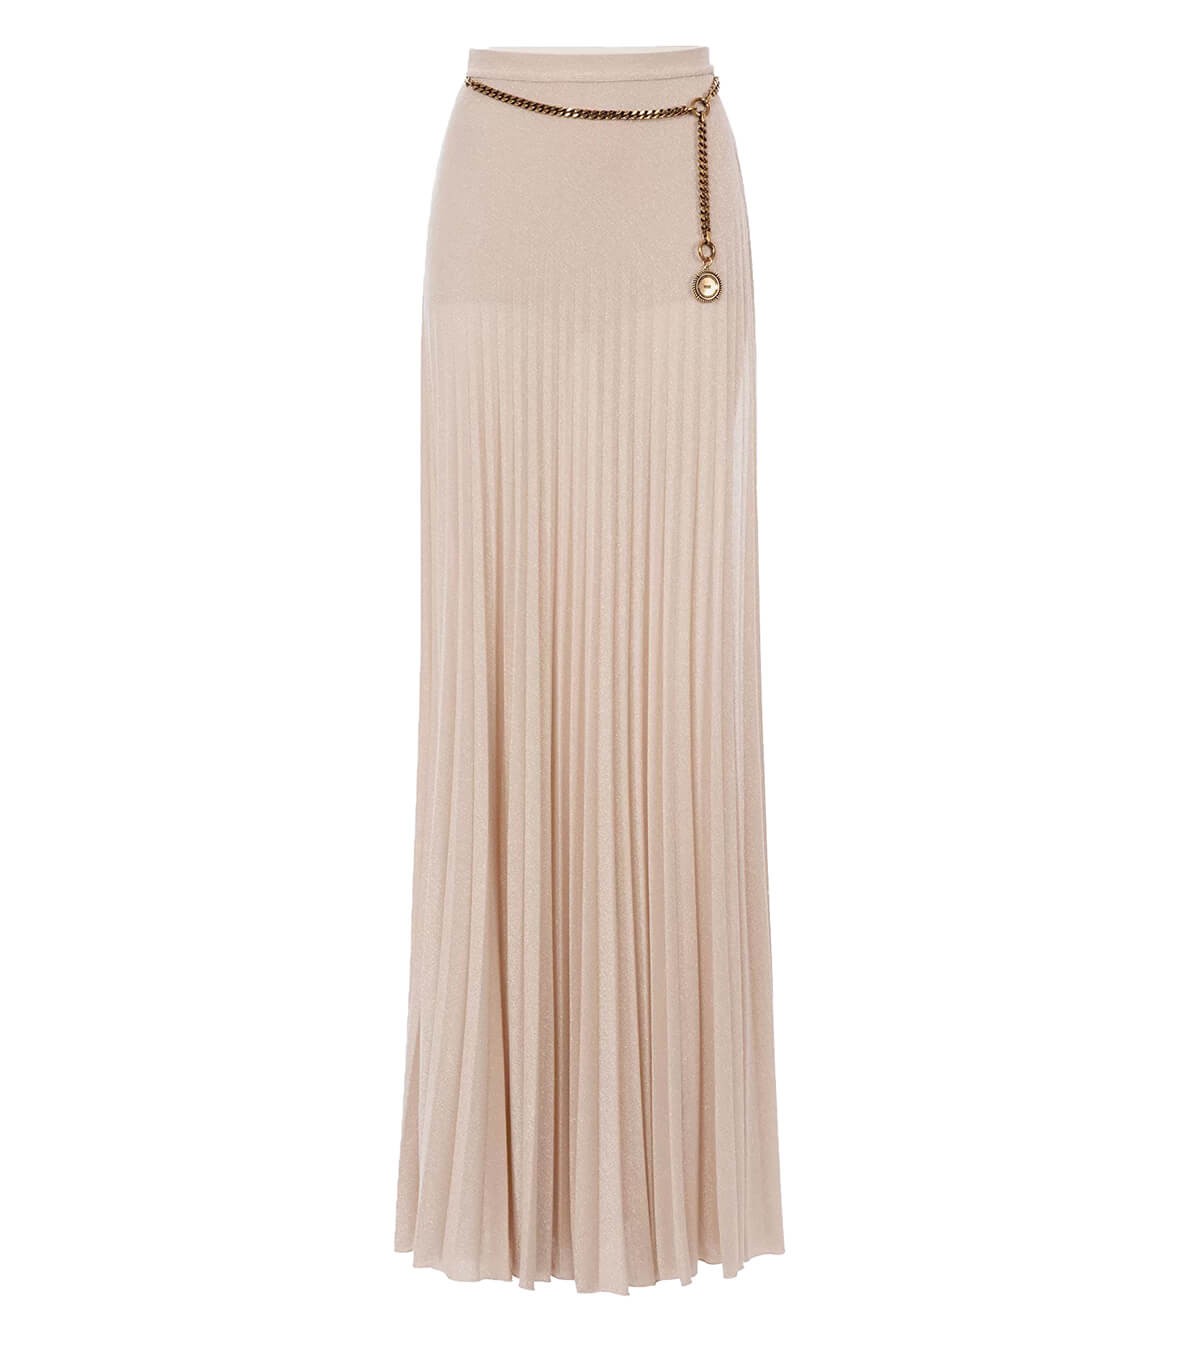 ELISABETTA FRANCHI GOLD LONG SKIRT WITH CHAIN